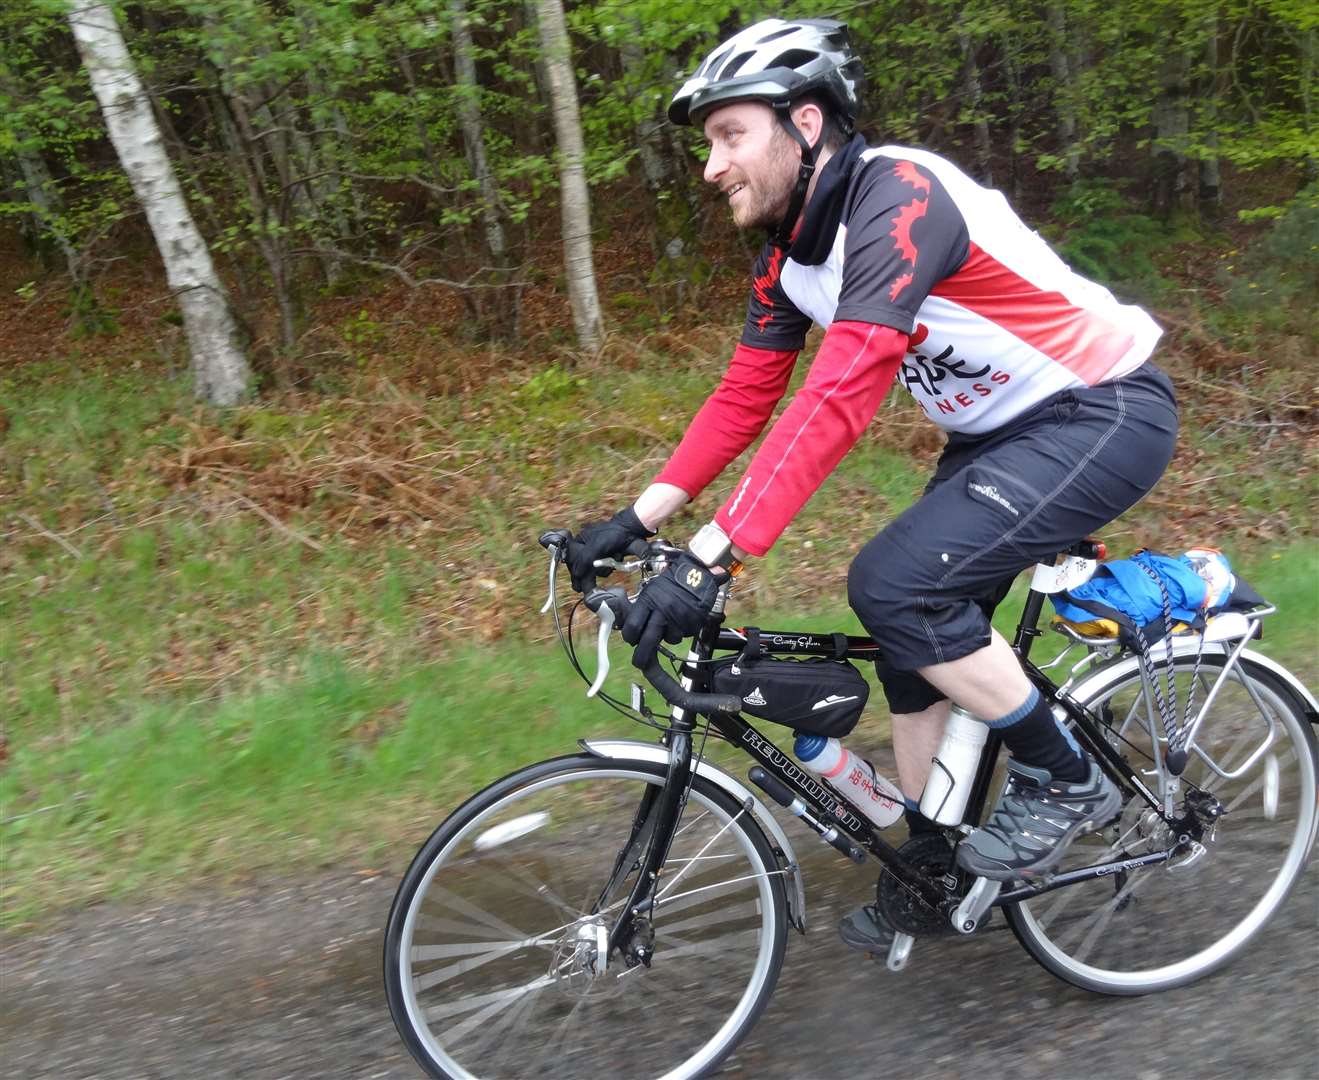 Flashback to 2014 and John taking part in the very first Etape Loch Ness.